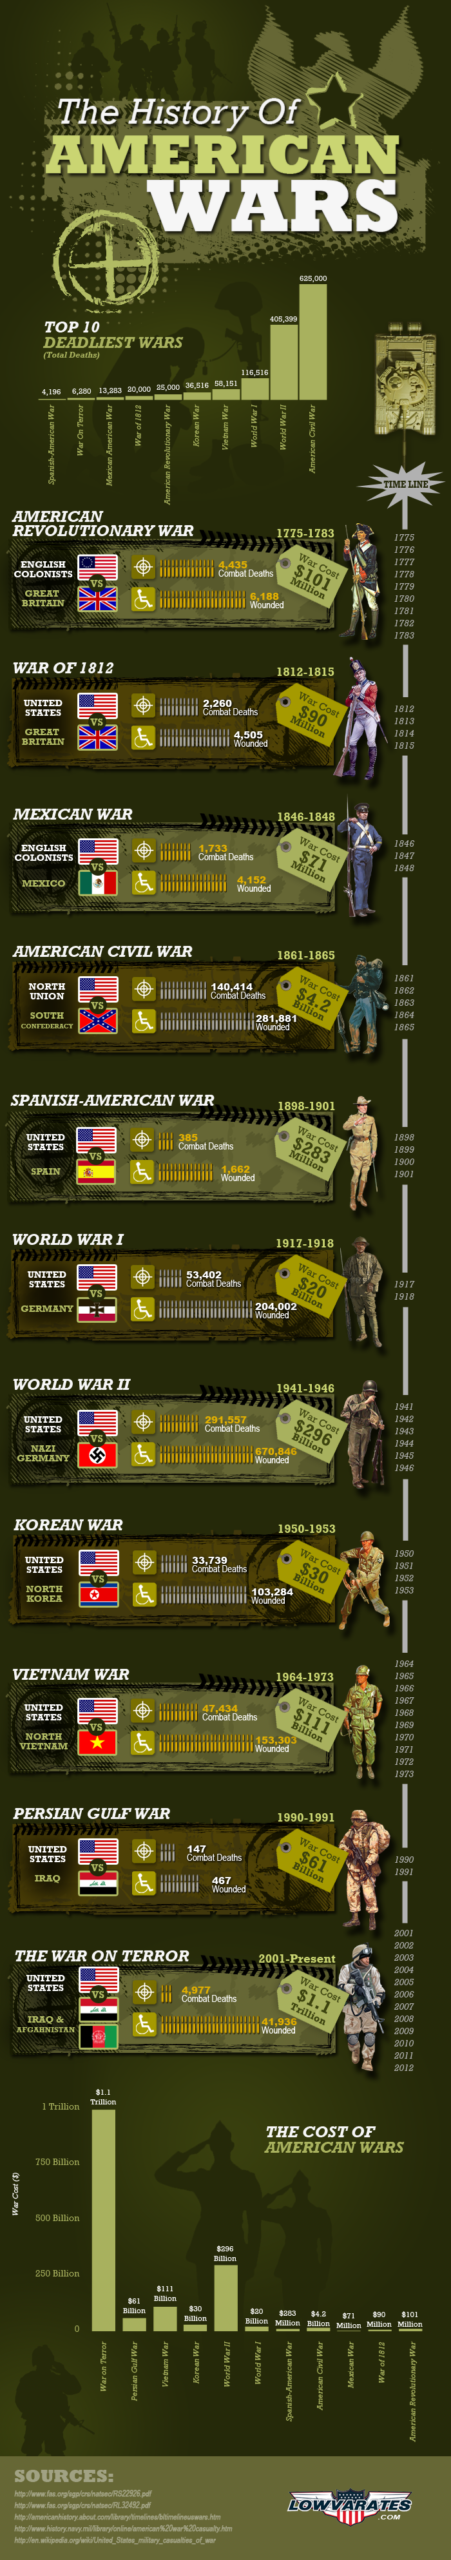 The History of American Wars